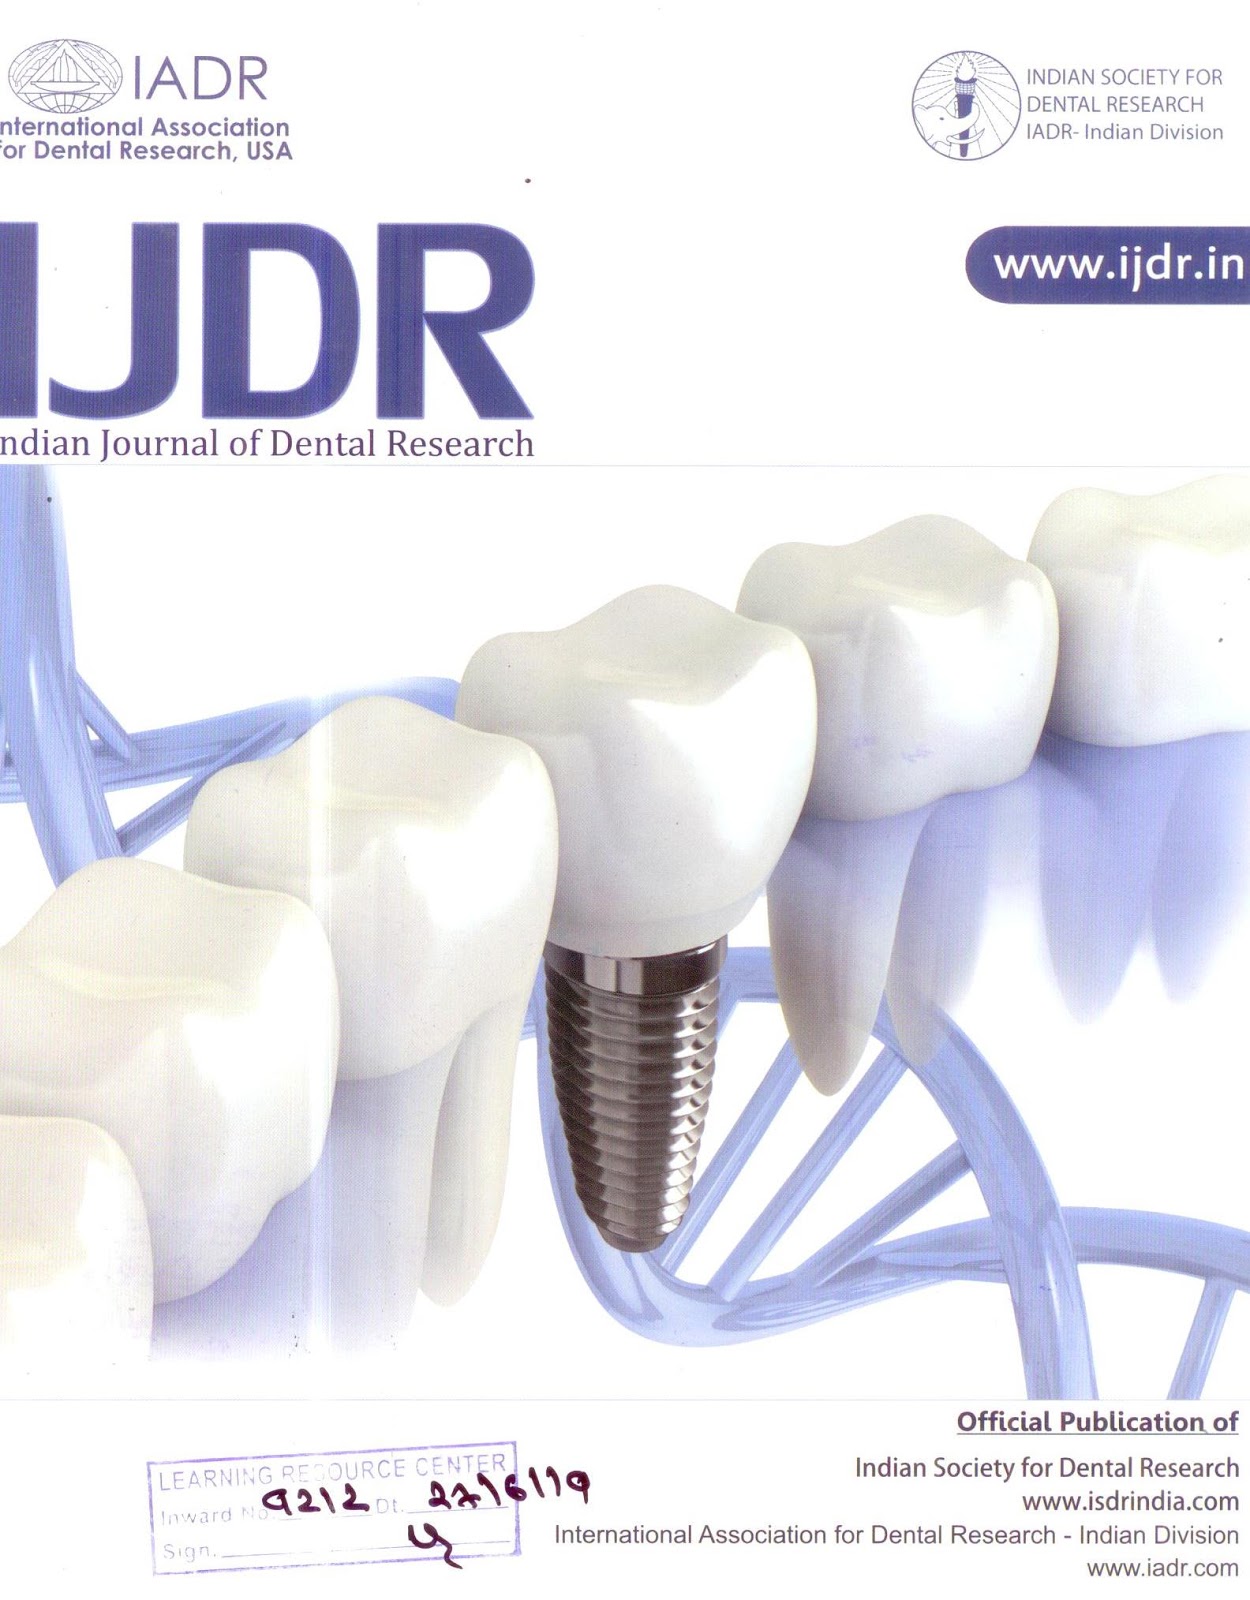 http://www.ijdr.in/showBackIssue.asp?issn=0970-9290;year=2019;volume=30;issue=1;month=January-February